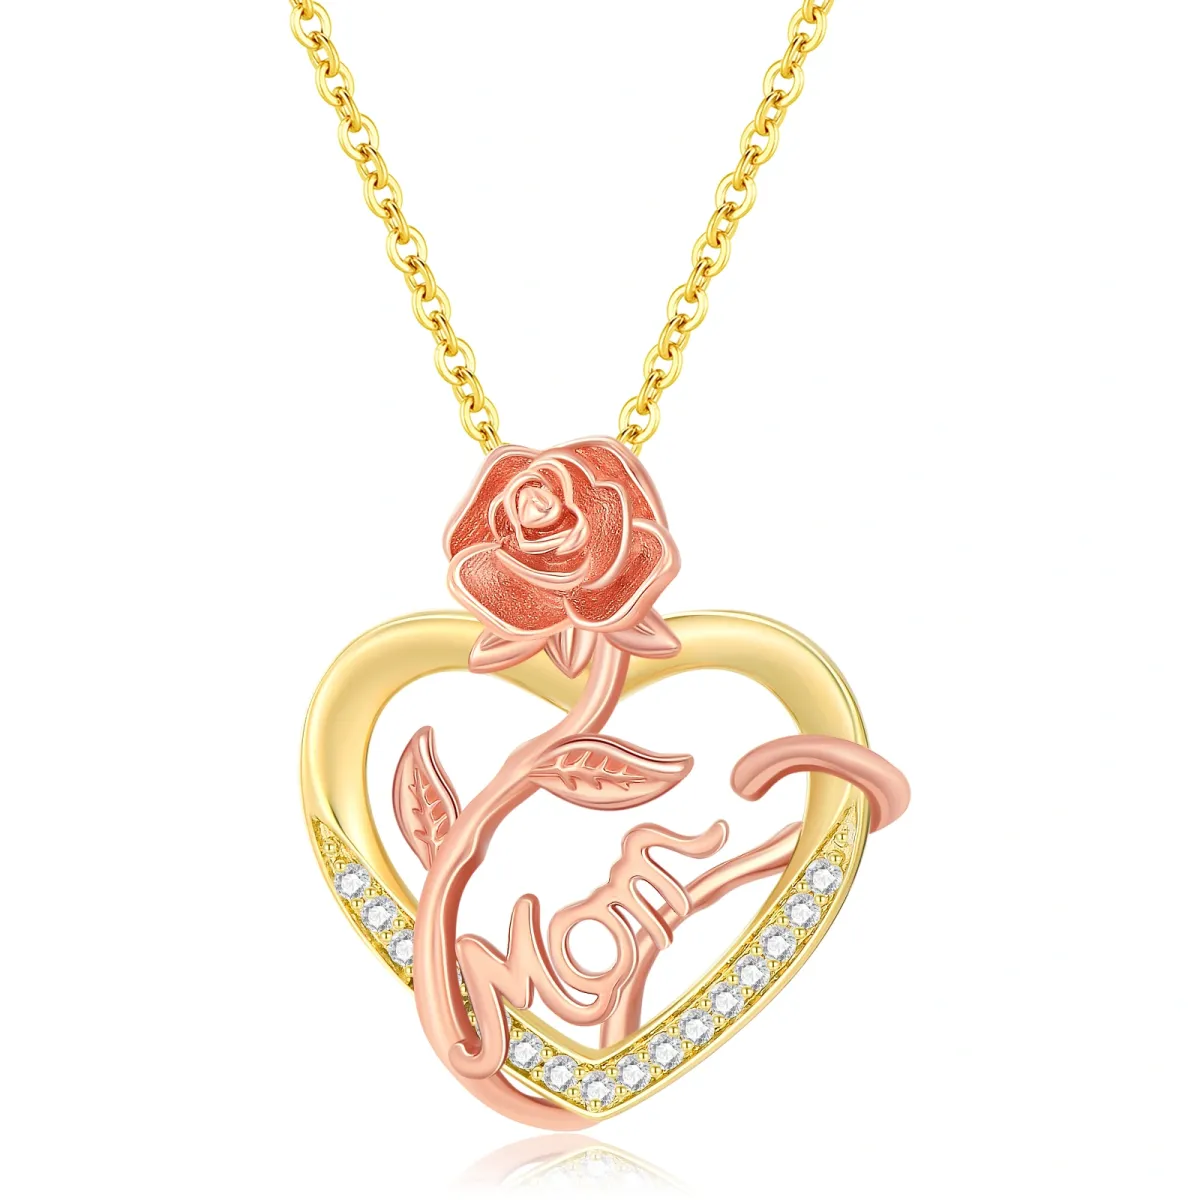 14K Gold & Rose Gold Circular Shaped Cubic Zirconia Rose & Heart Pendant Necklace with Engraved Word-1